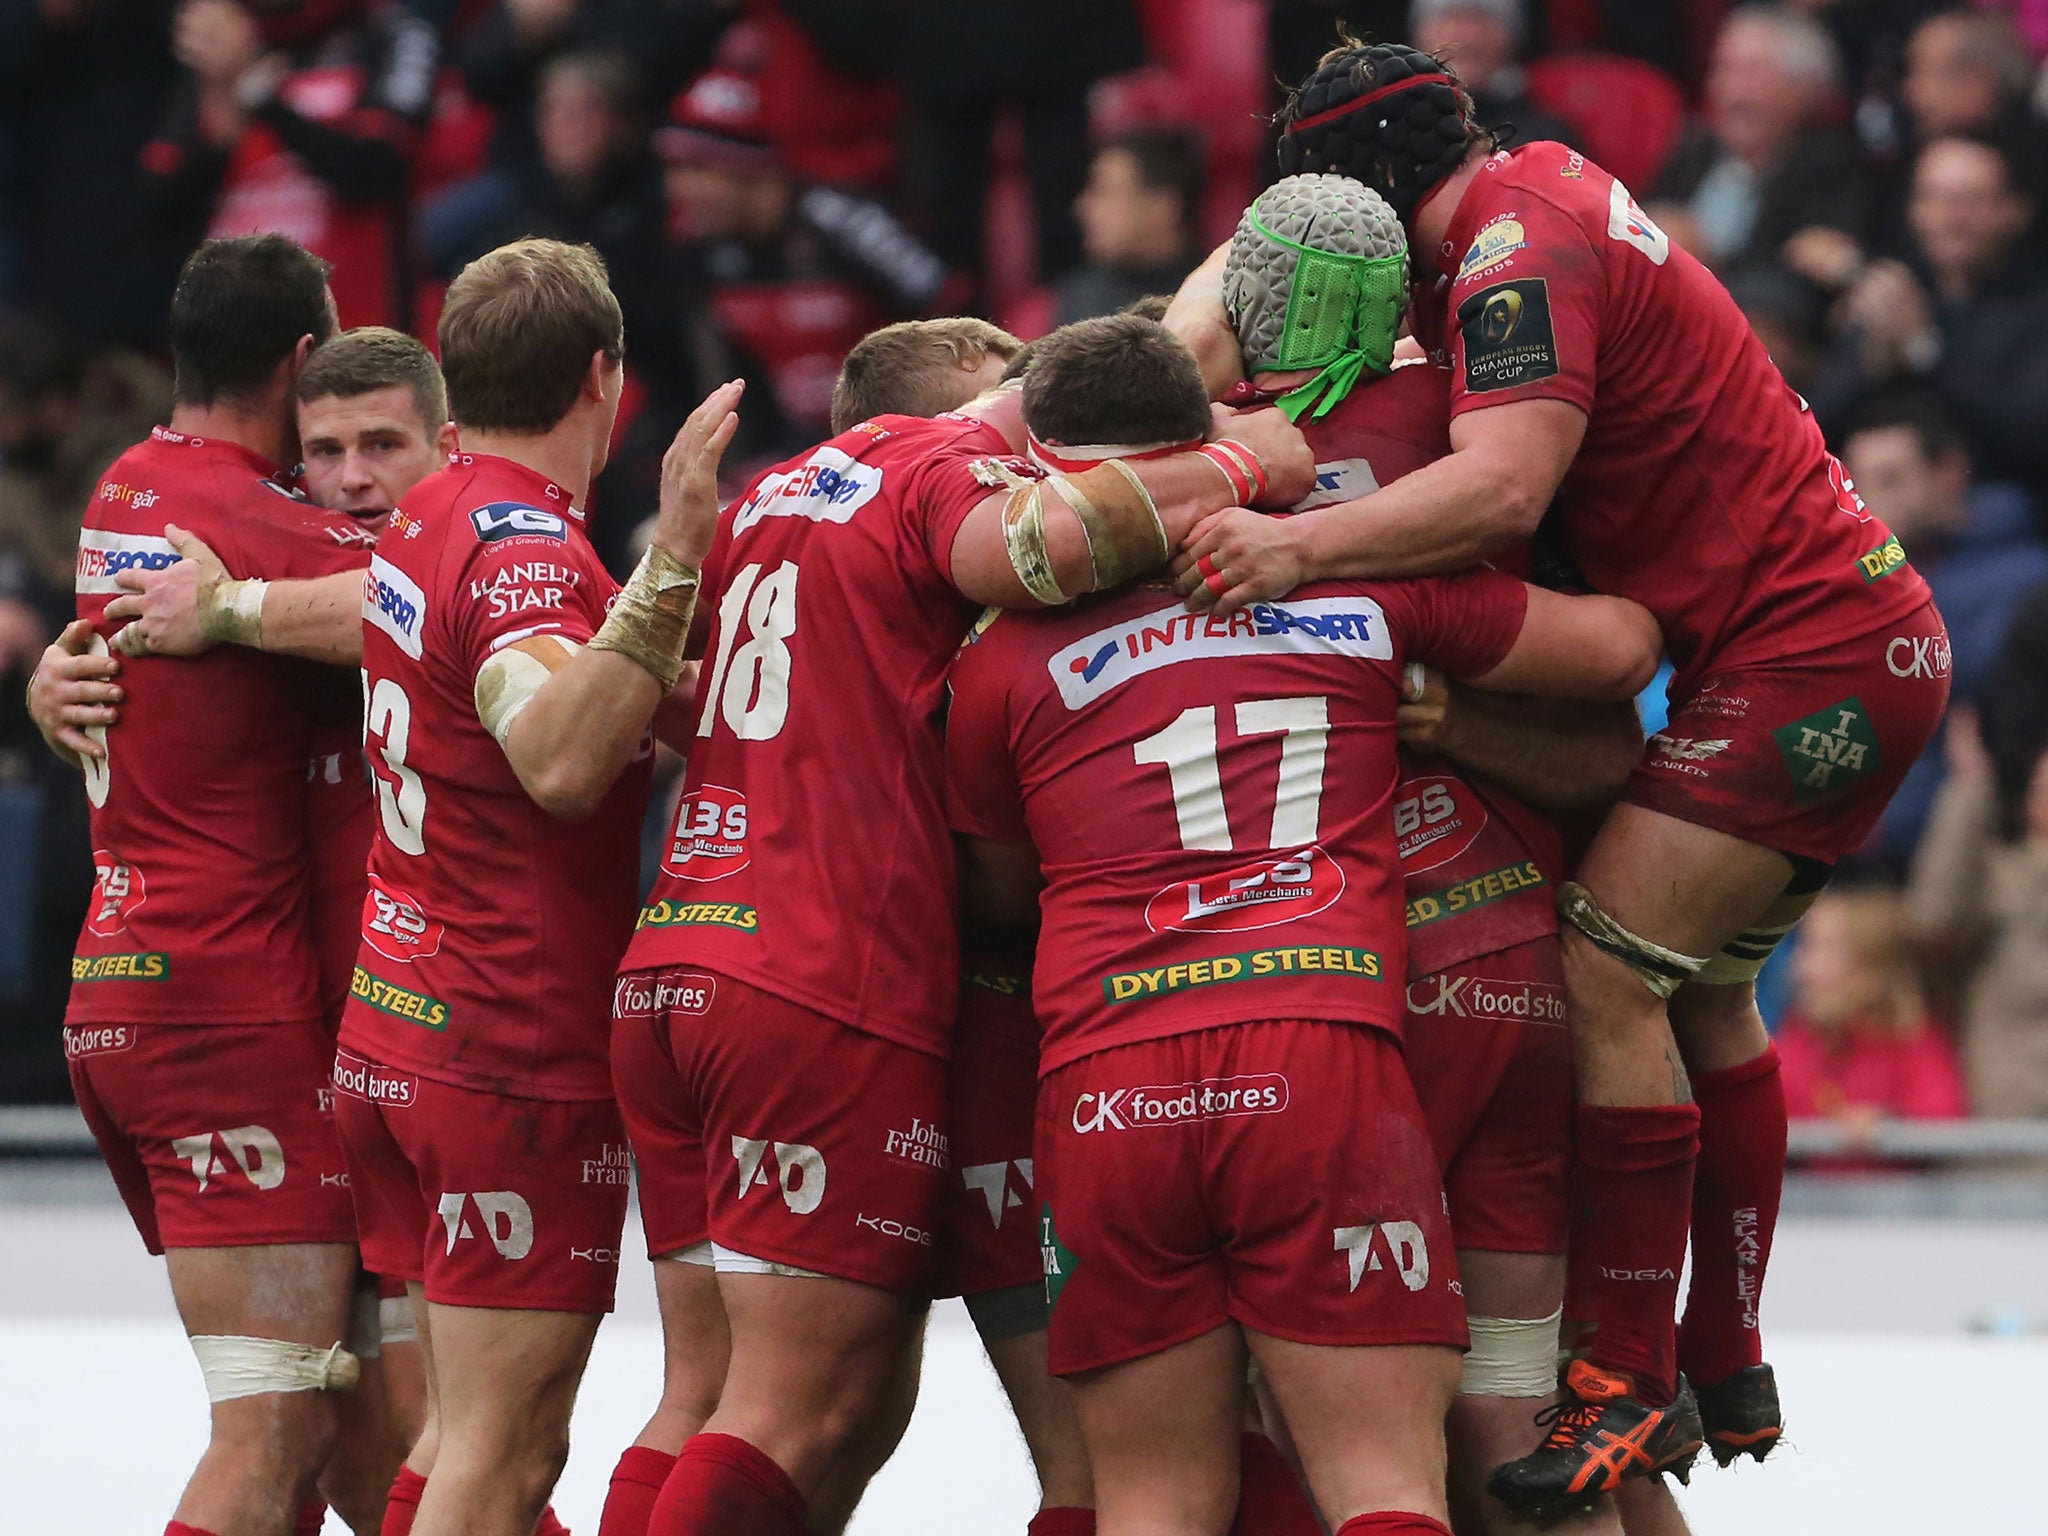 Toulon's players celebrate at the final whistle